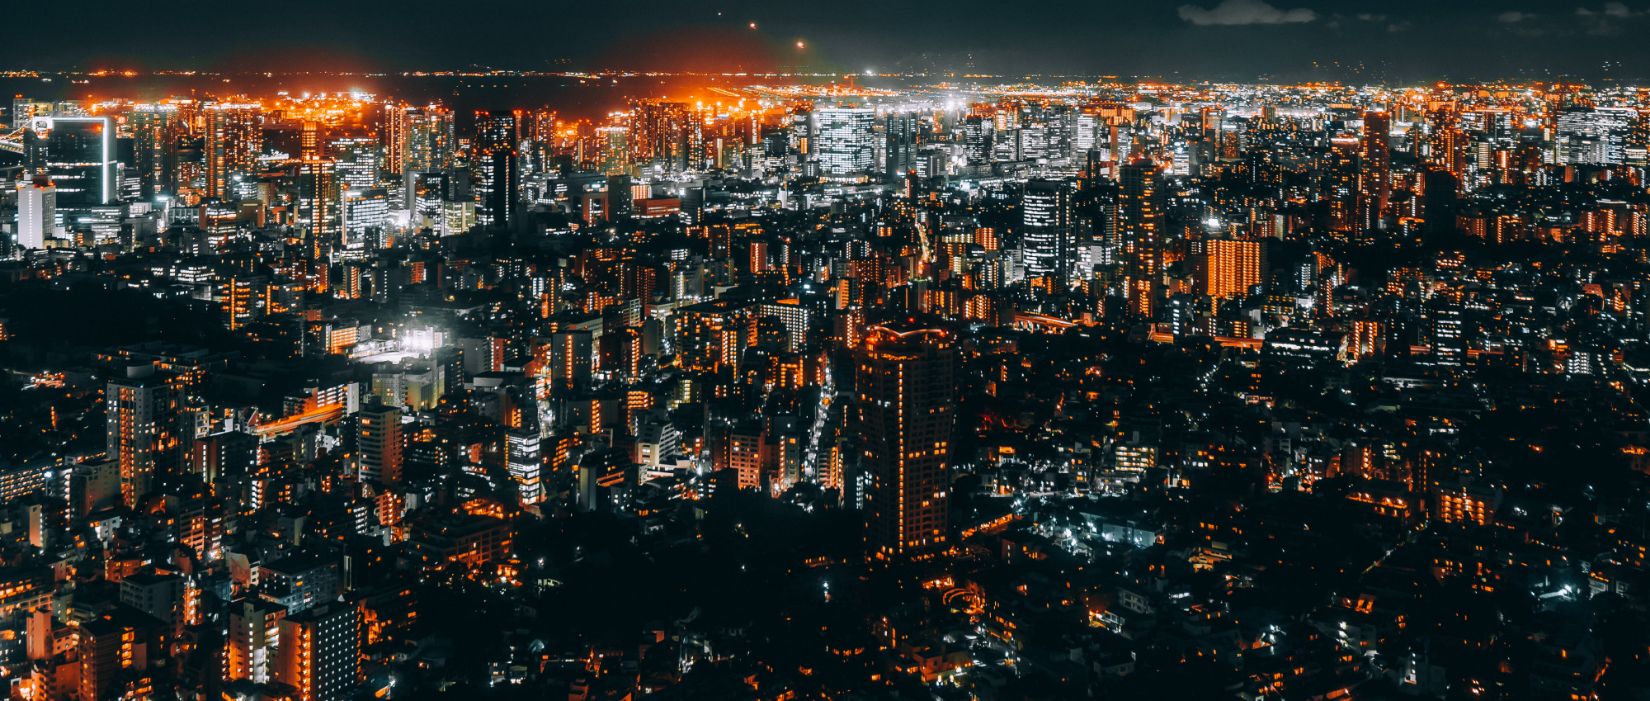 city at night time